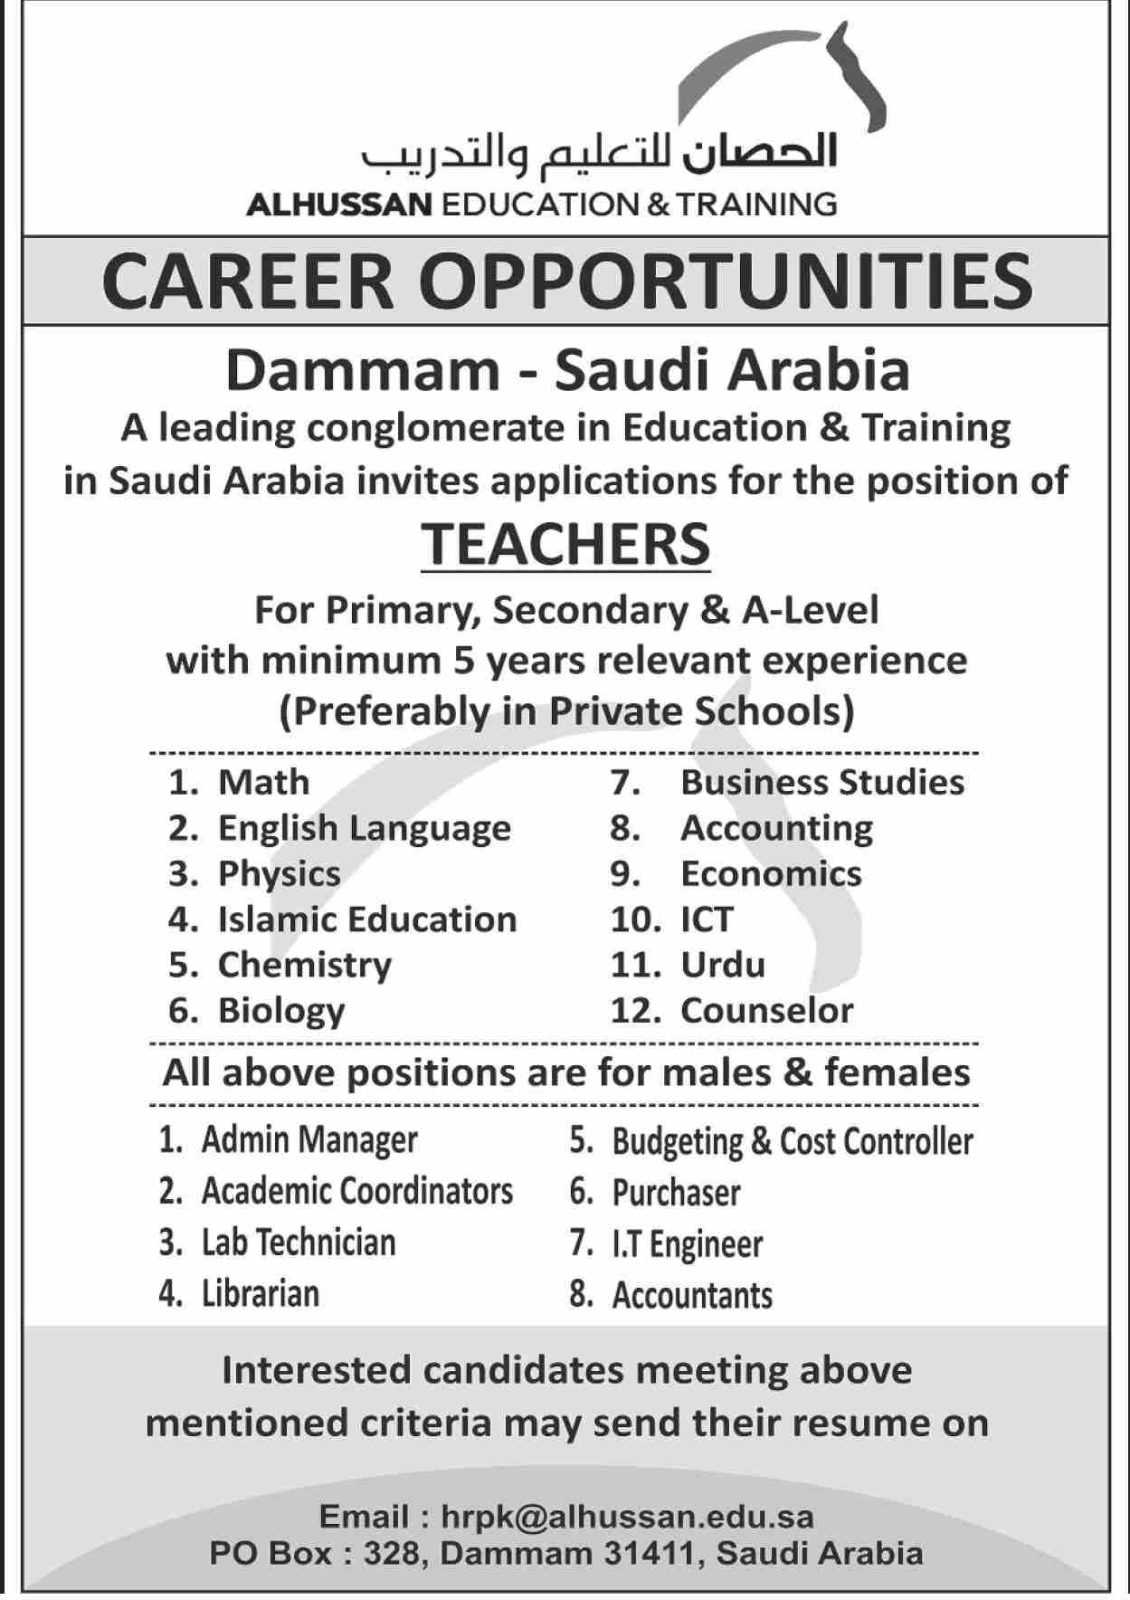 Jobs in AlHussan Education and Training Dammam Saudi Arabia 2020 Apply Now